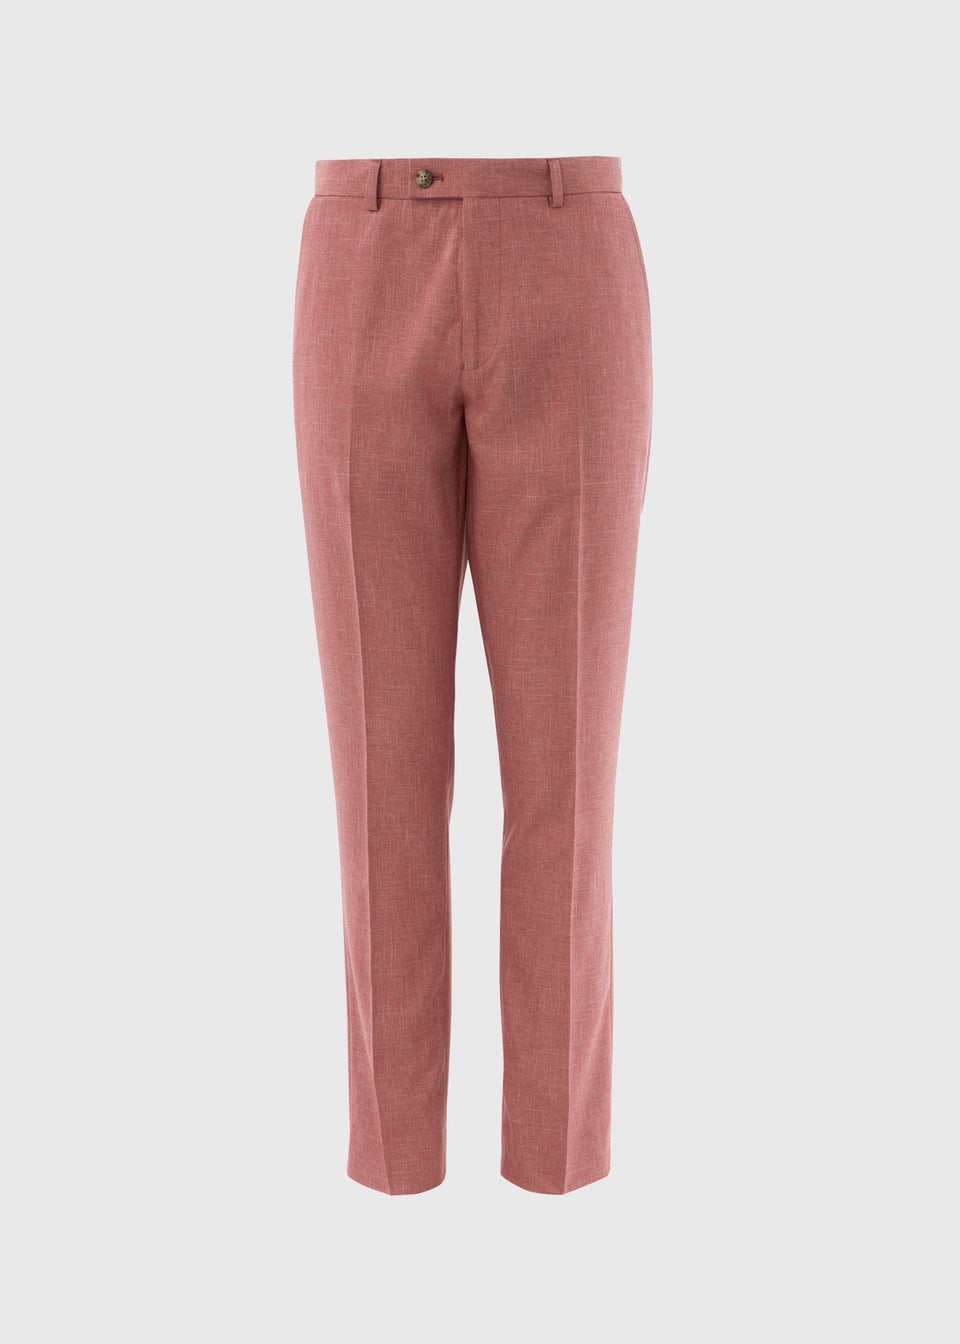 Taylor & Wright Pink Parton Slim Fit Trousers